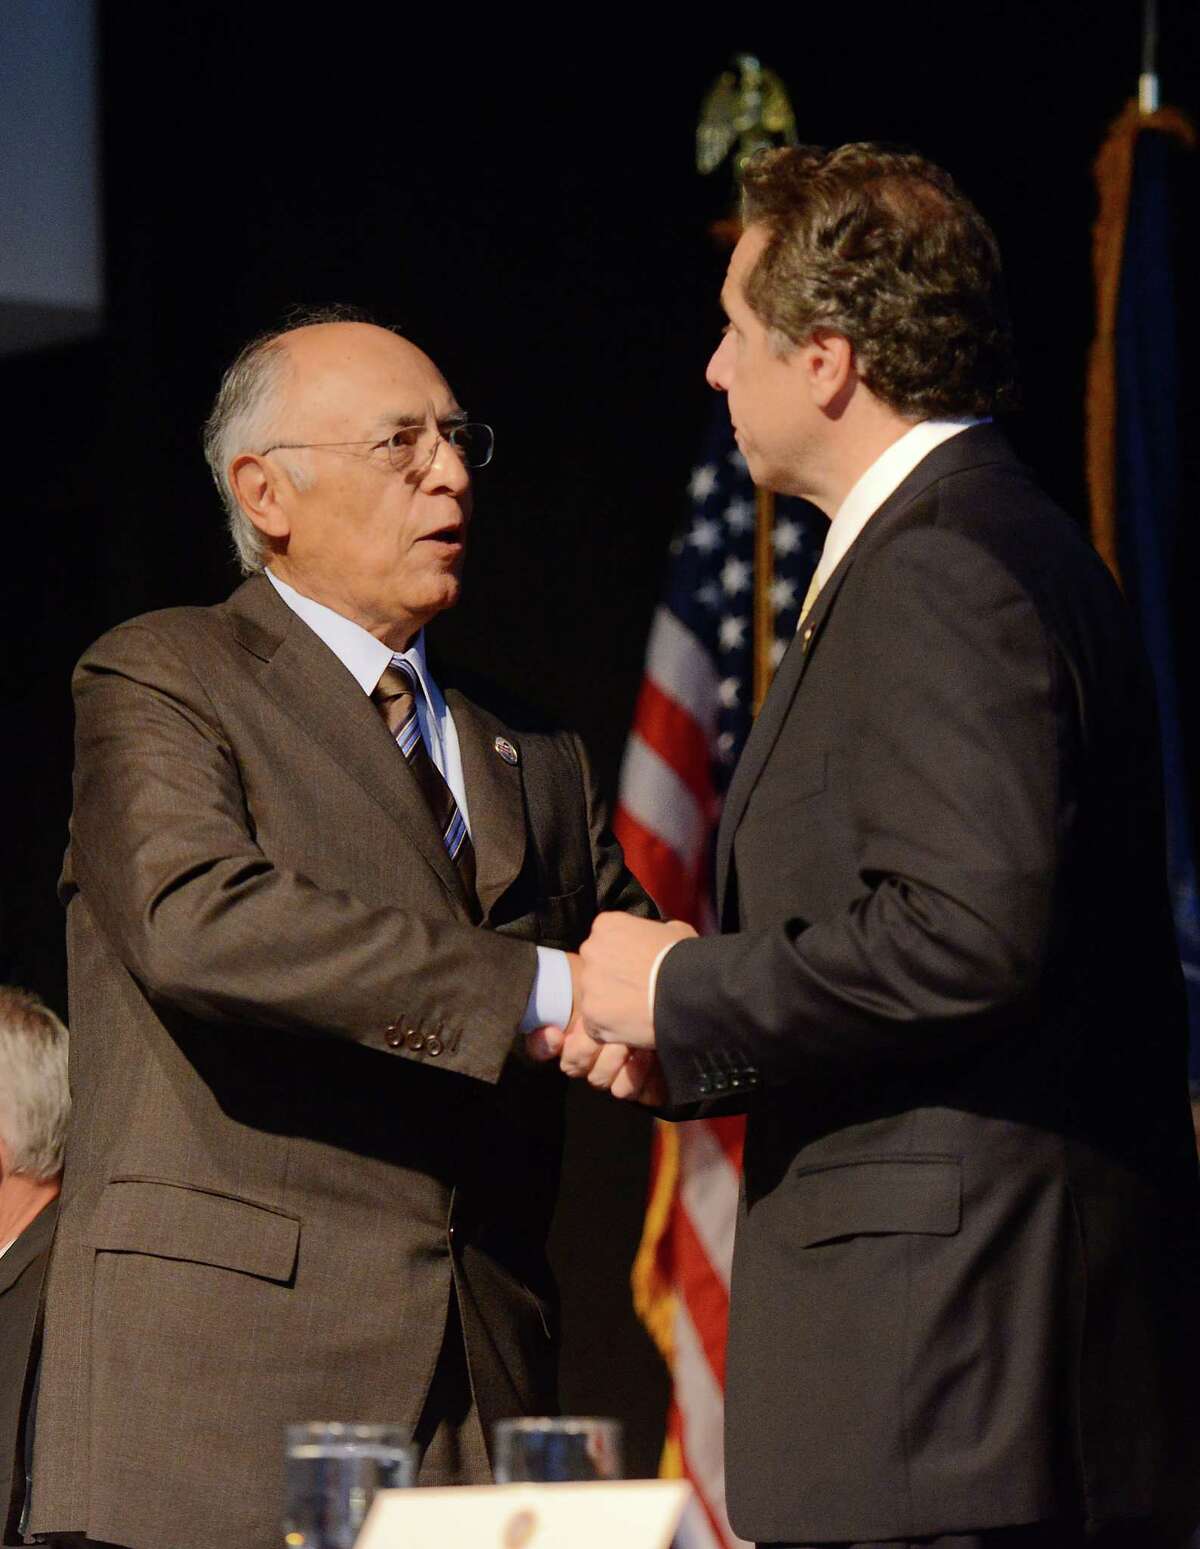 Hector Ruiz, left, chairman and CEO of Advanced Nanotechnology Solutions, Inc. and Gov. Andrew Cuomo meet Thursday, Oct. 10, 2013, in Utica, N.Y., following the announcement of Nano Utica. The consortium consists a group of more than six leading tech companies and will include a $1.5 billion investment. (Mark DiOrio / Observer-Dispatch) ORG XMIT: NYUTI